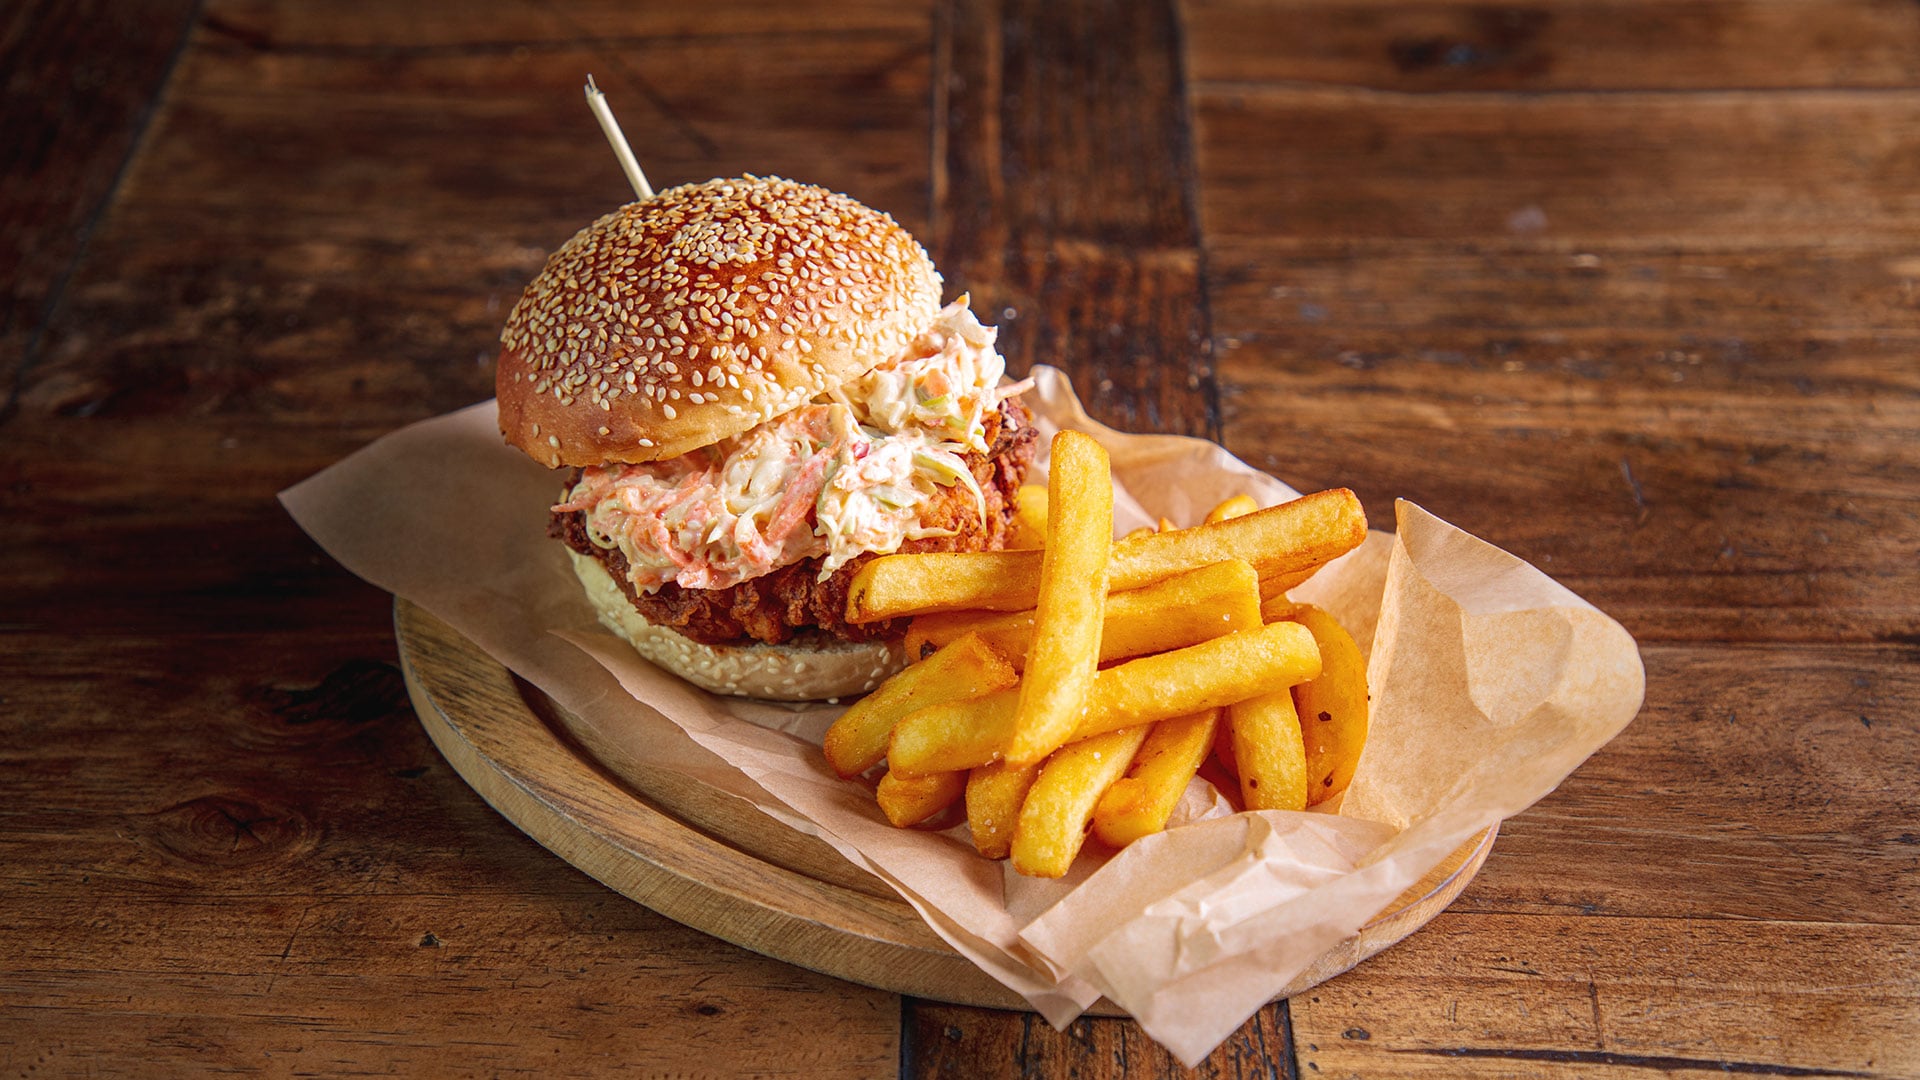 Pulled pork sandwich with French fries